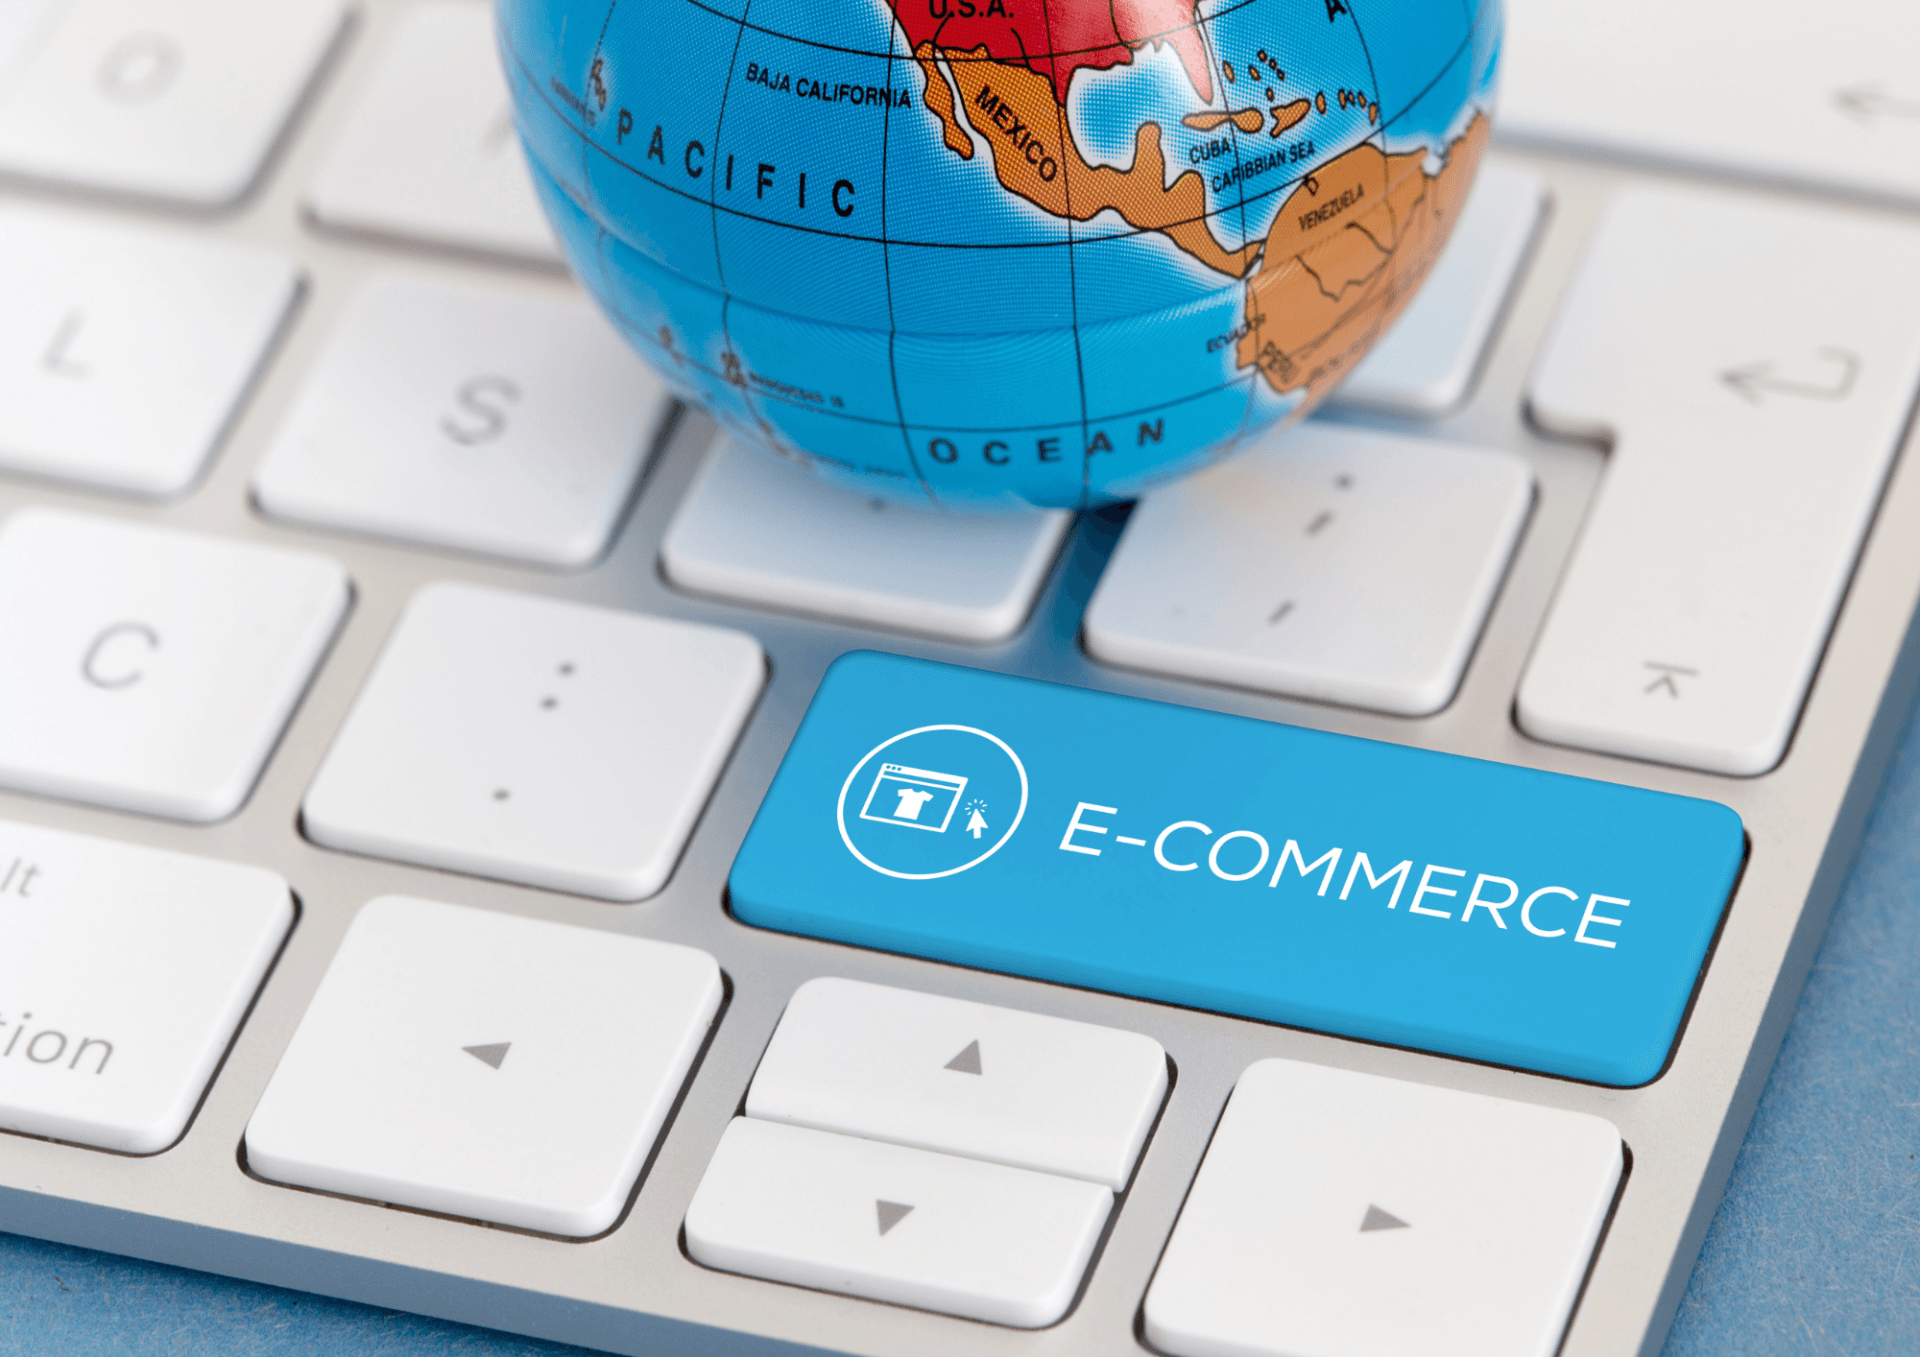 eCOMMERCE OFFERS BETTER MARKETING OPPORTUNITIES